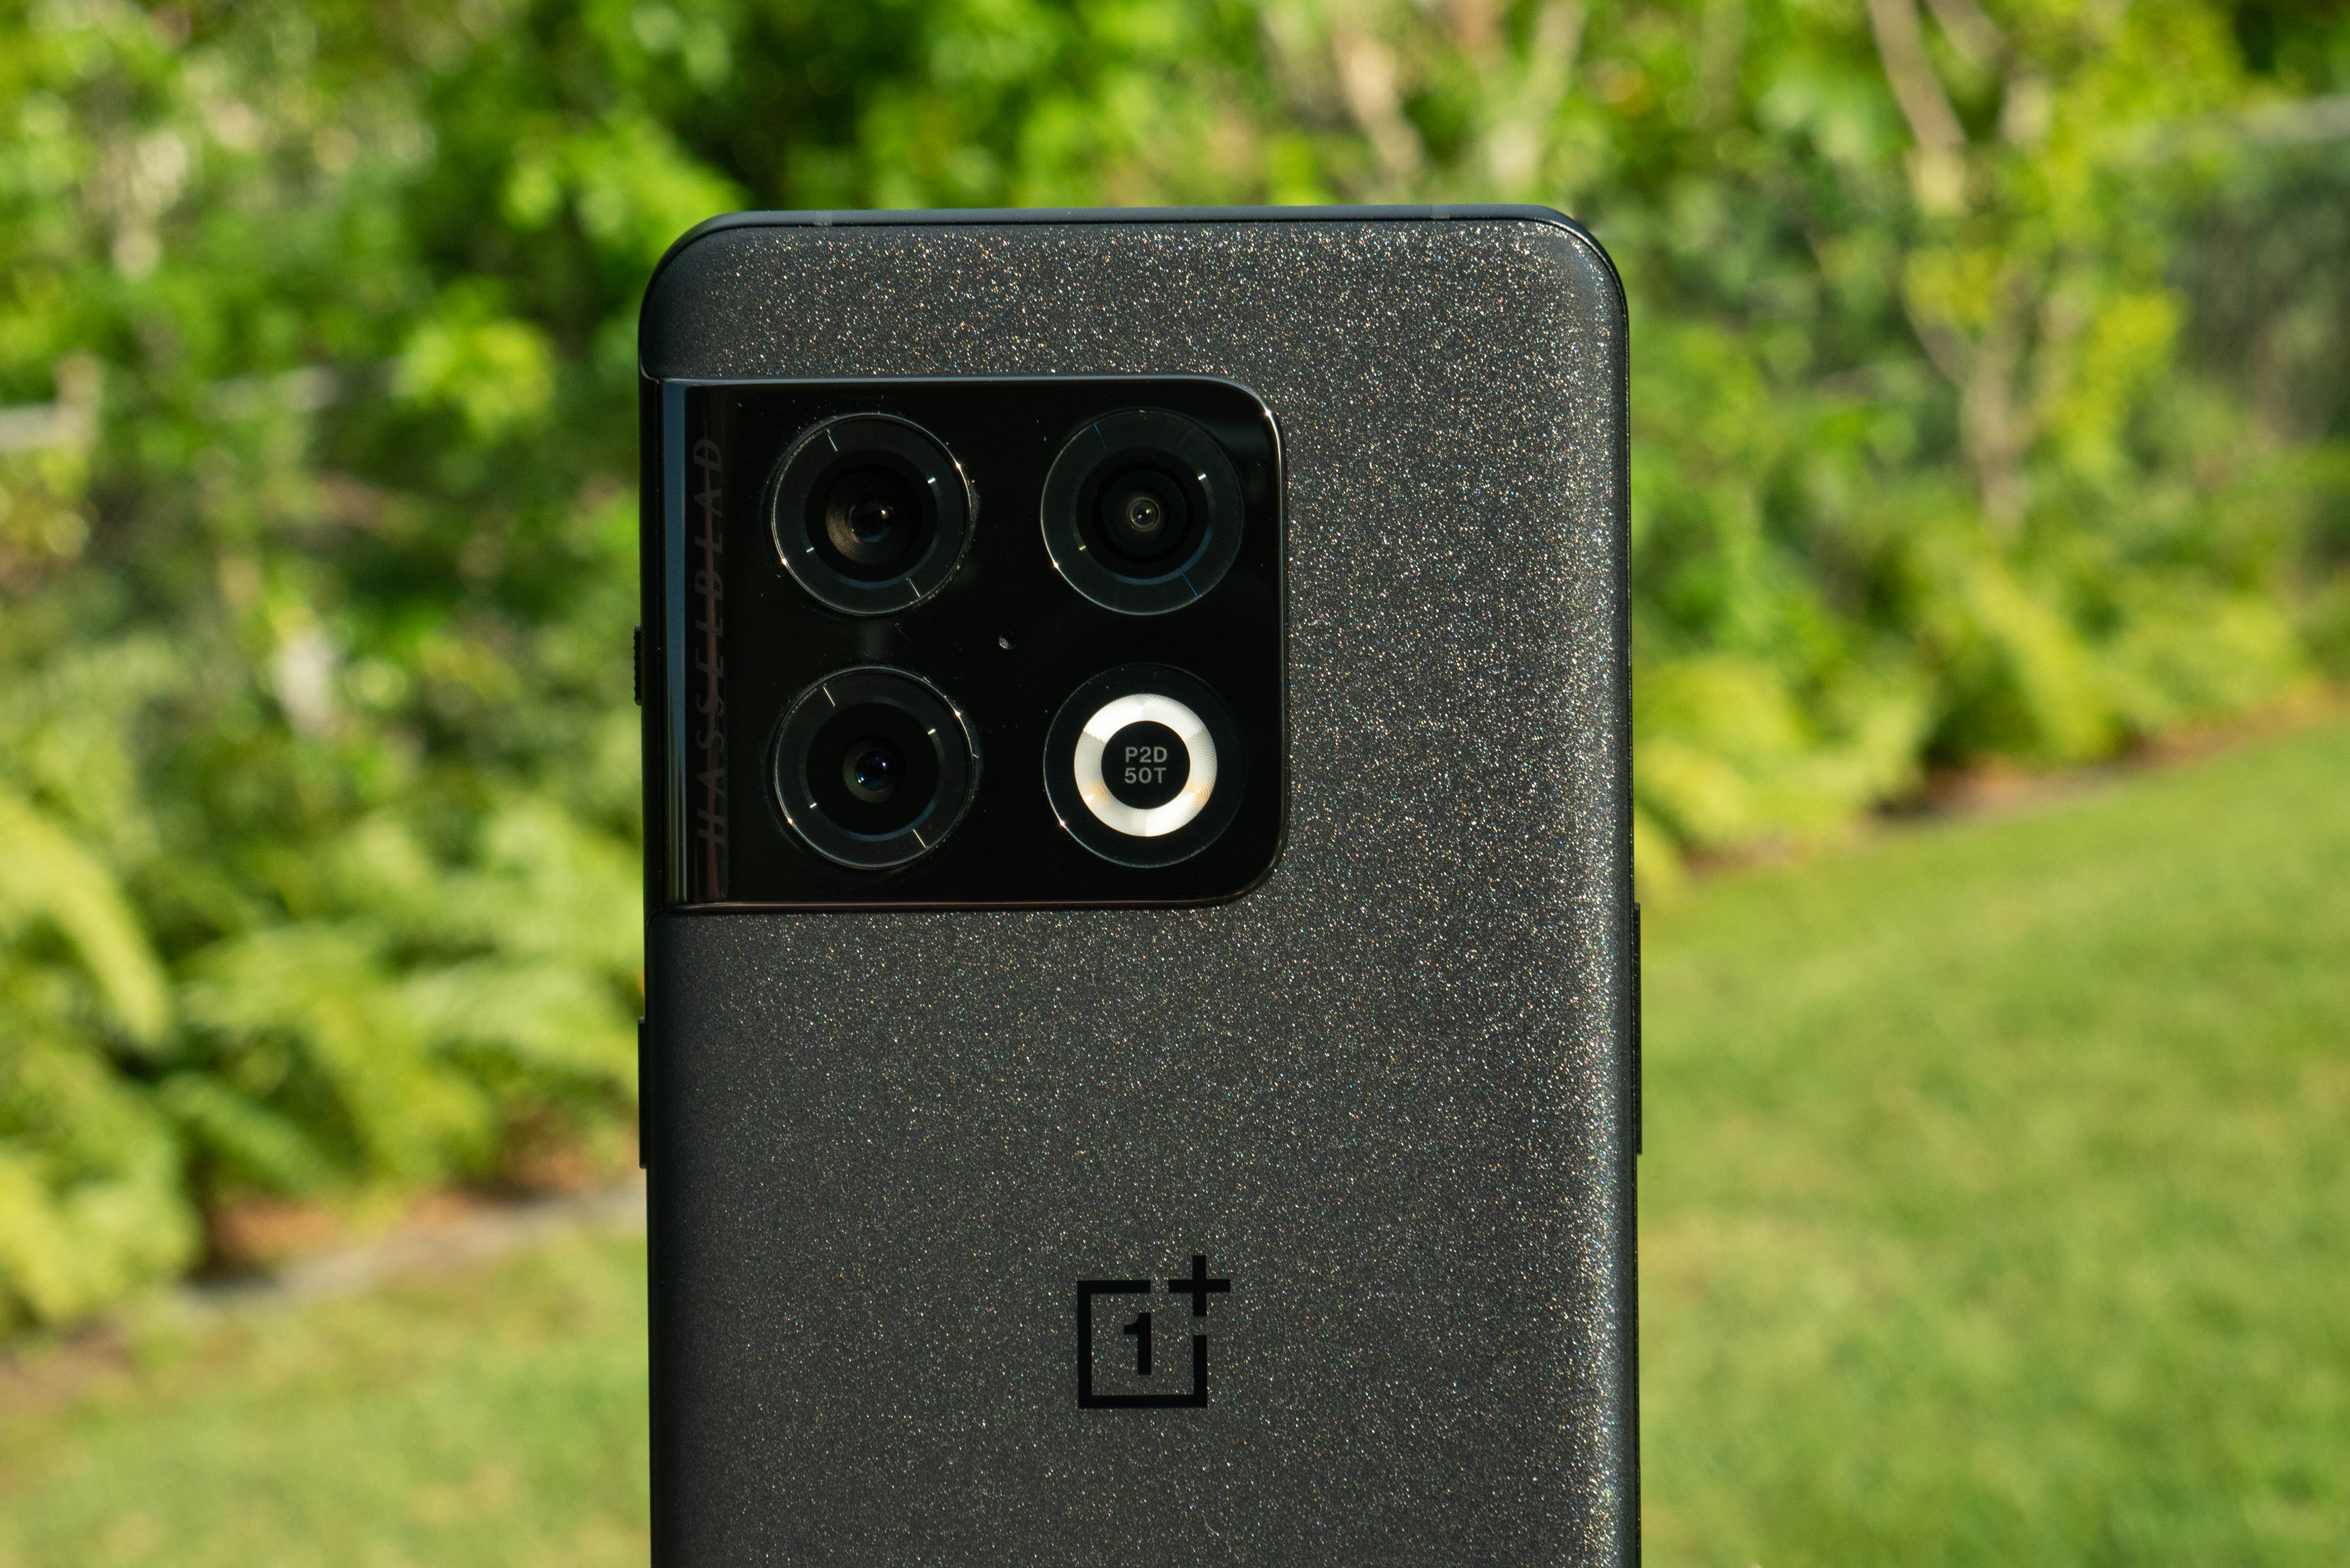 OnePlus 10 Pro gains compatibility with Verizon’s 5G network